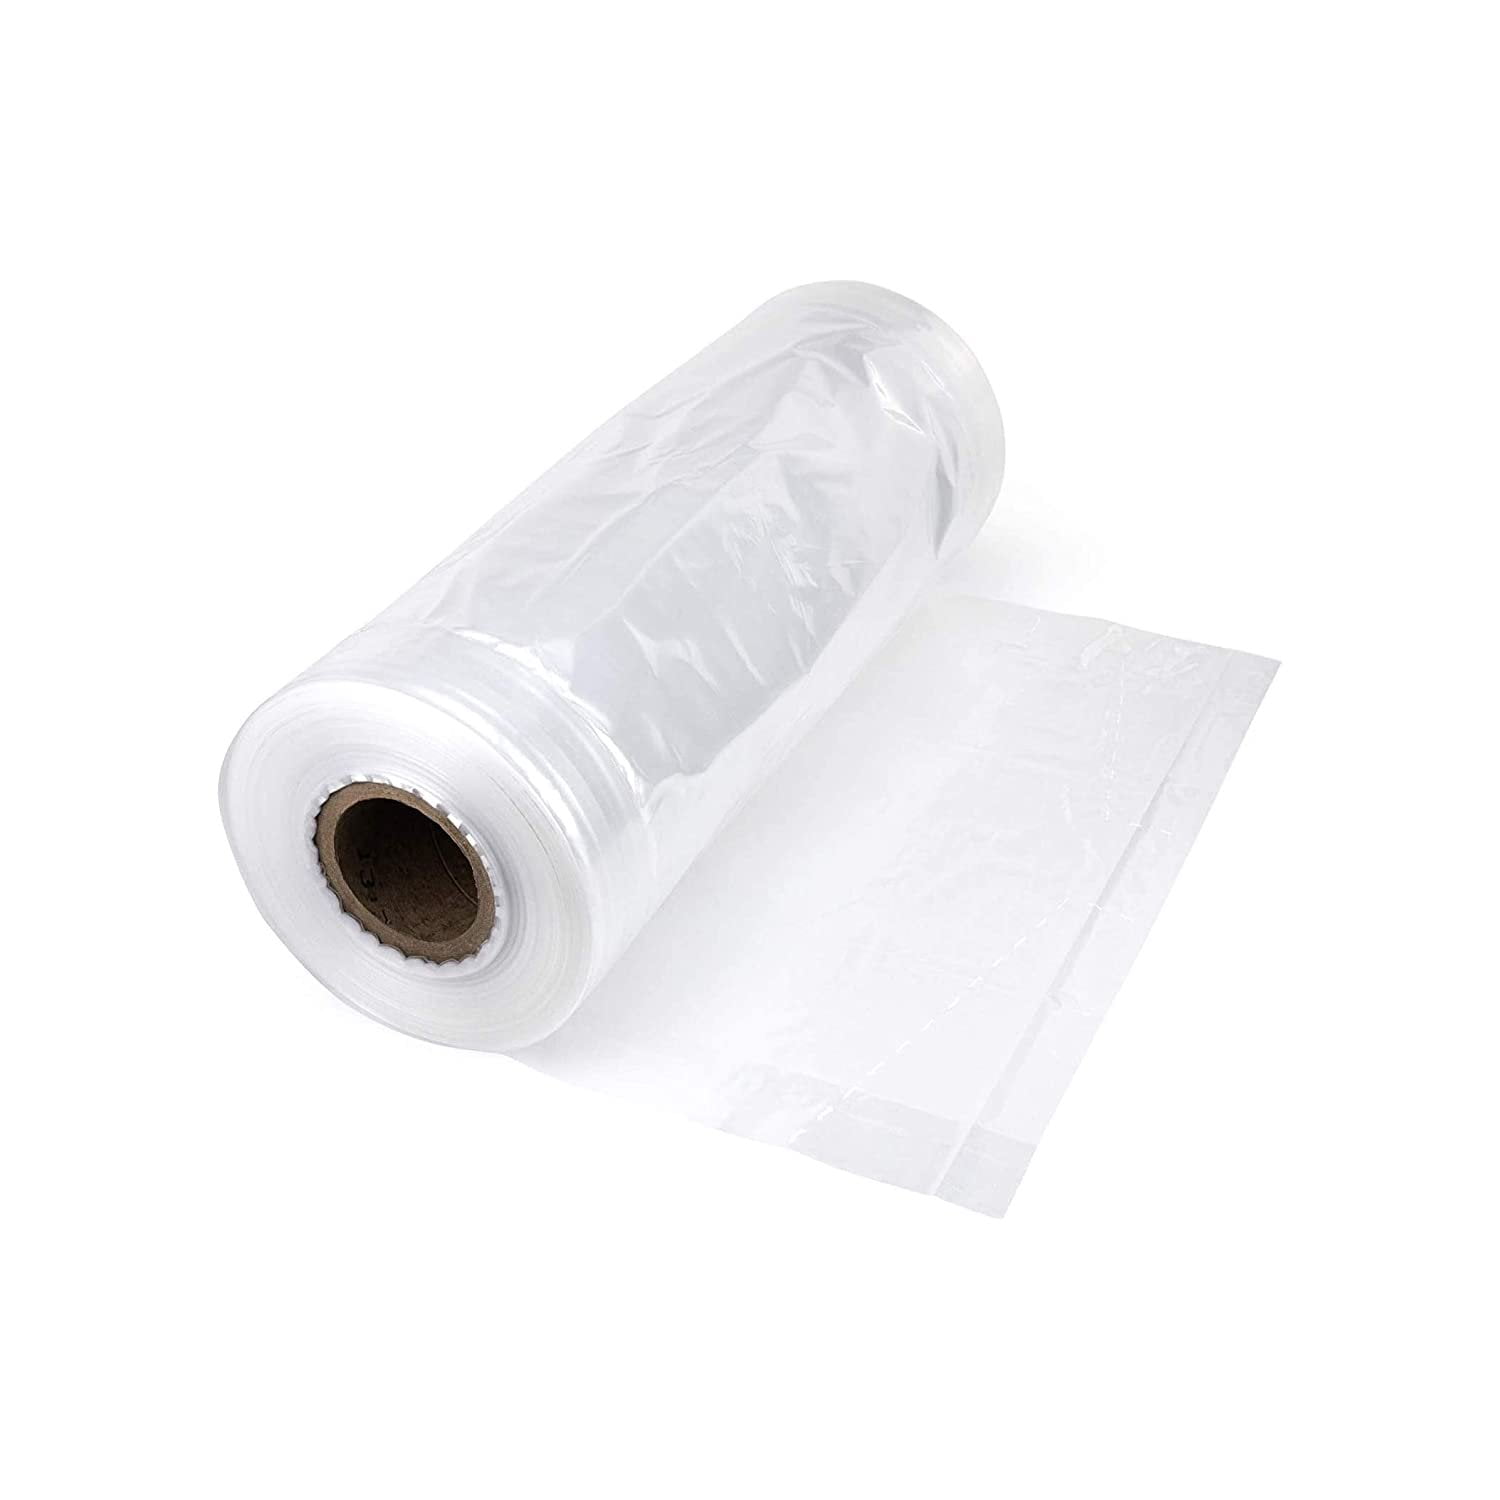 Qty 300 Reclosable Zipper Type Plastic Poly bags 2mil LDPE Food Grade 3 x 4" 